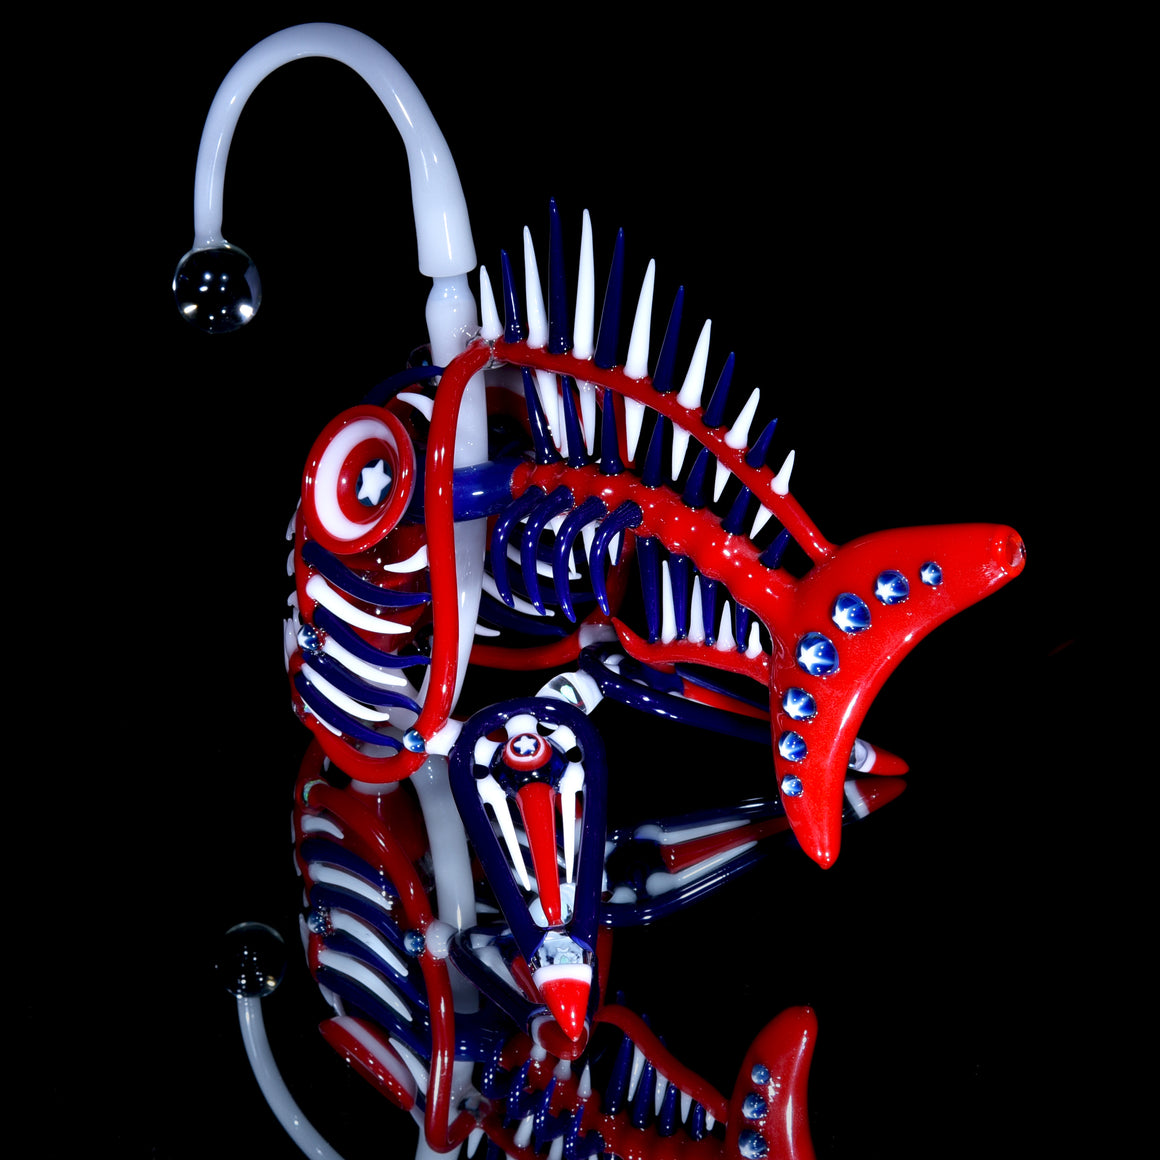 "Stars, Stripes, and Spikes" - 2014 Full-size Angler Fish